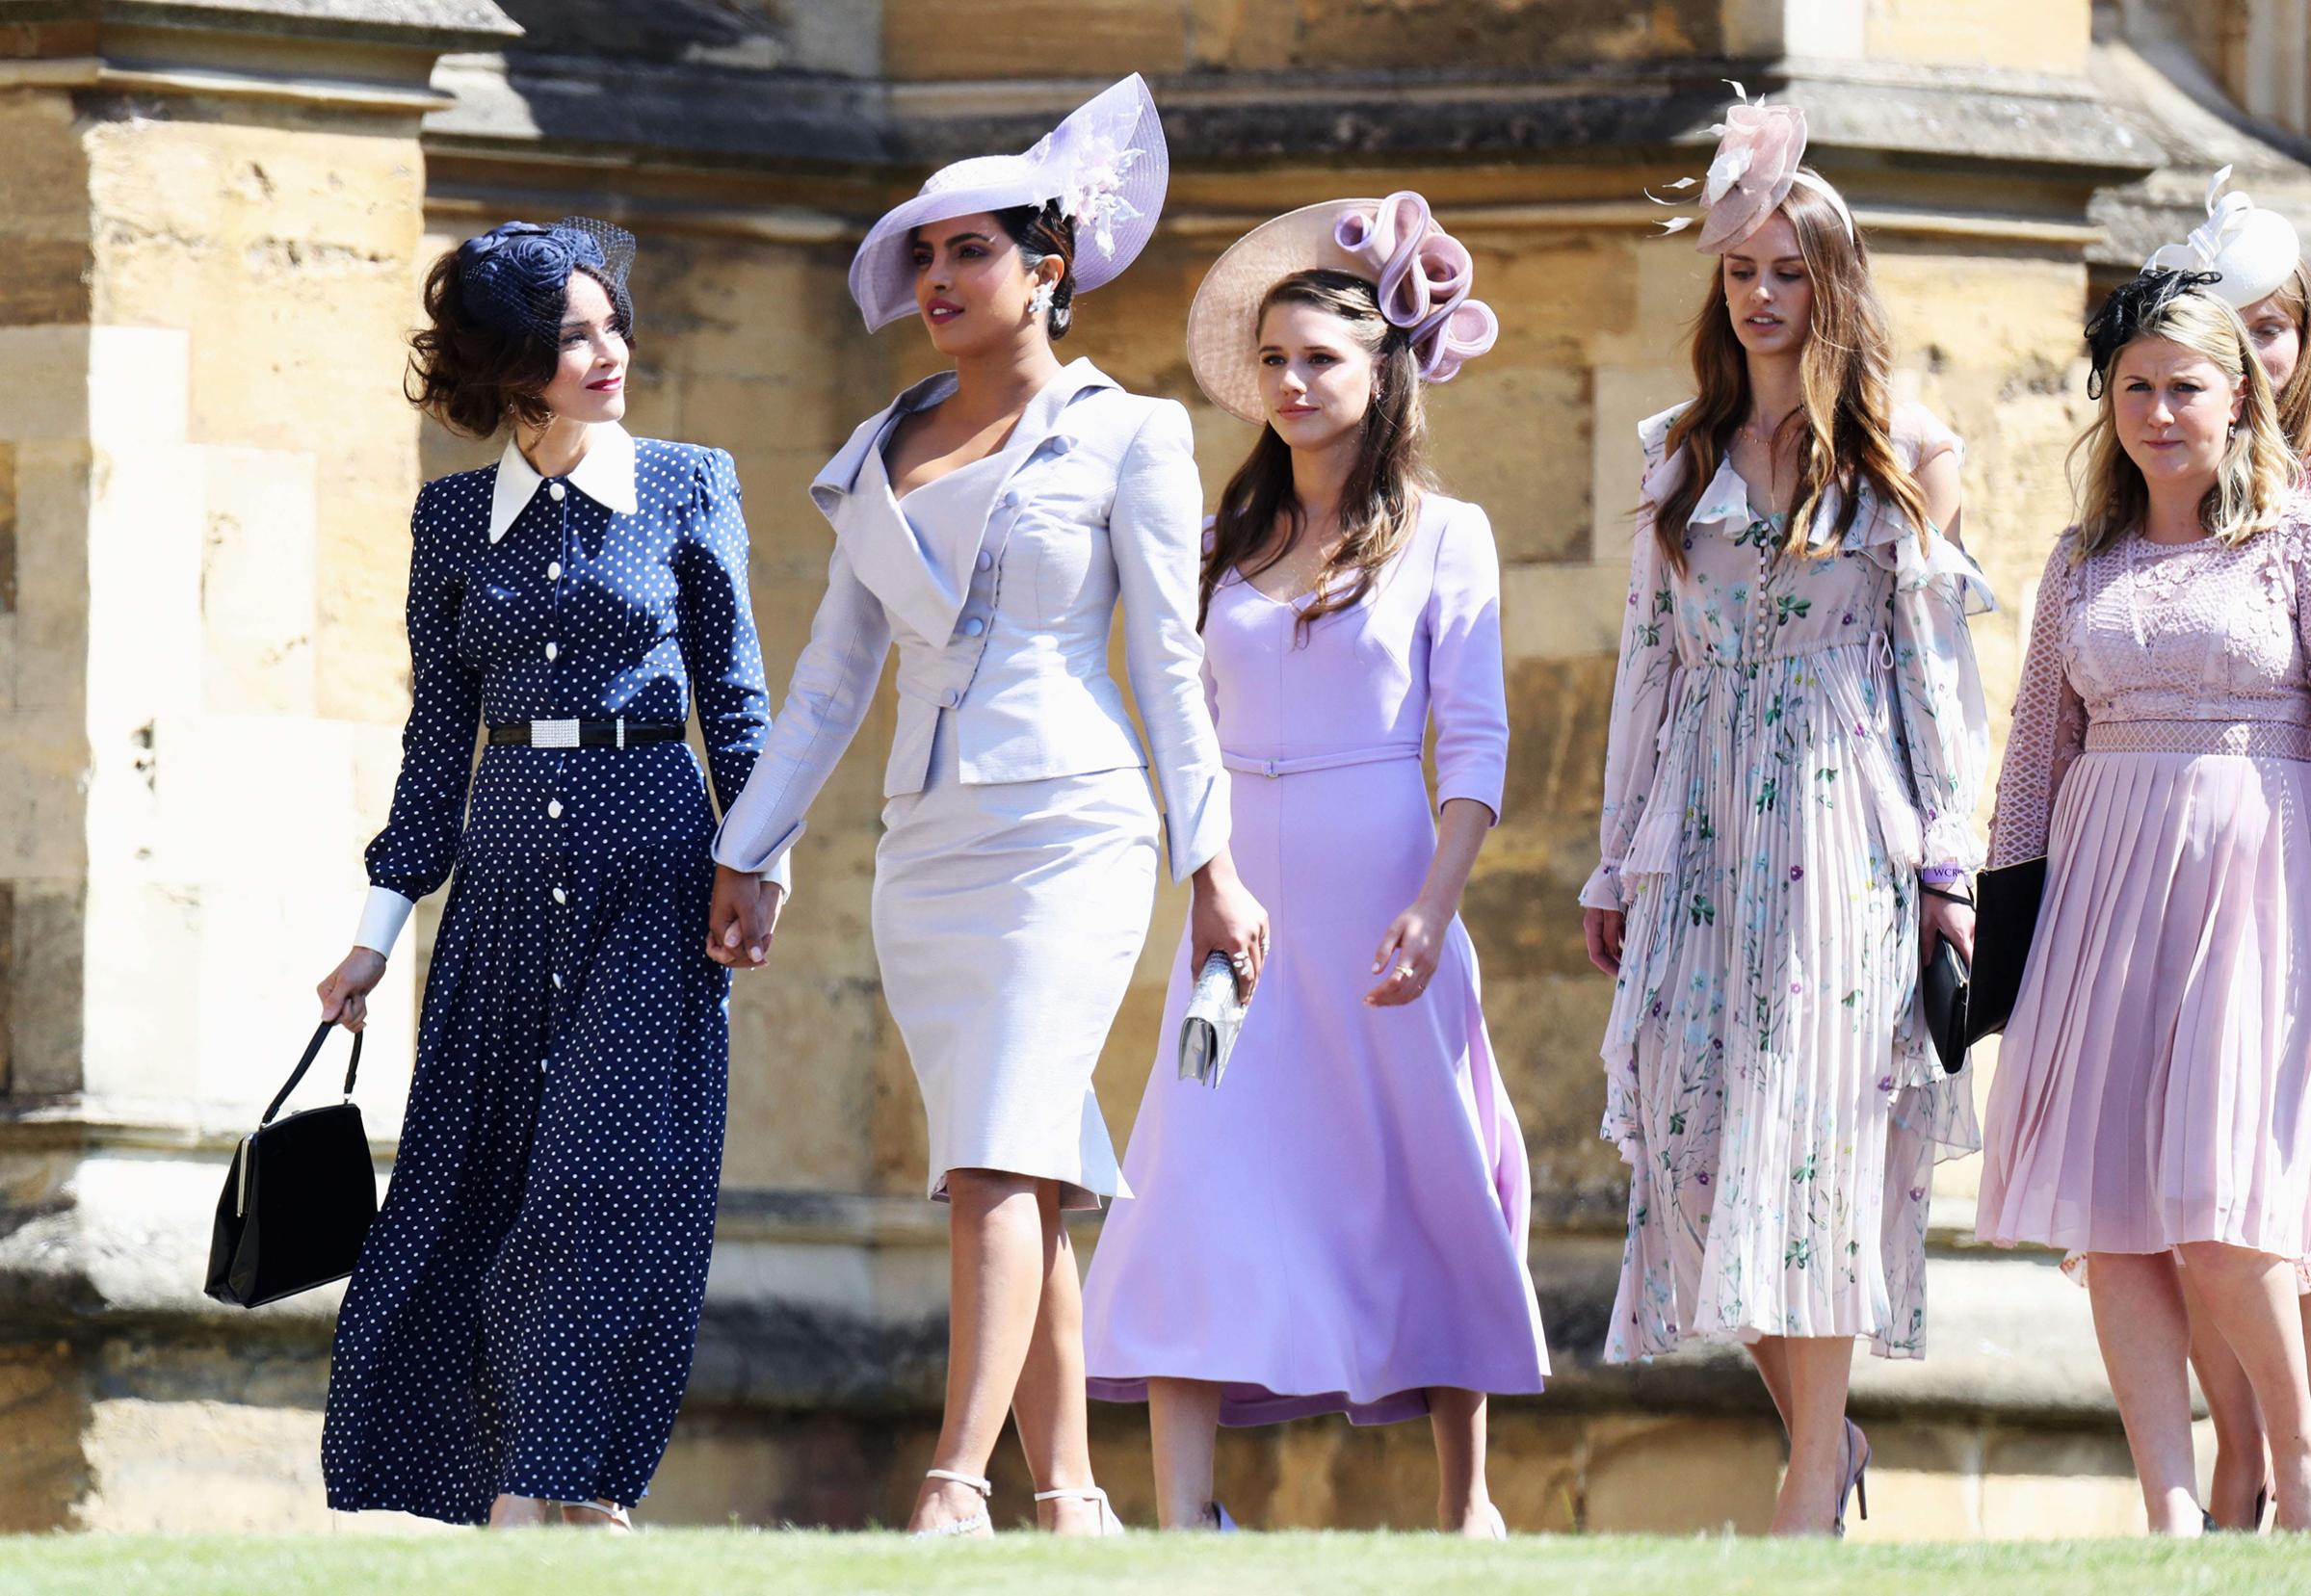 Abigail Spencer (left) and Priyanka Chopra arrive for the wedding ceremony of Britain's Prince Harry, Duke of Sussex and US actress Meghan Markle at St George's Chapel, Windsor Castle, in Windsor, on May 19, 2018.